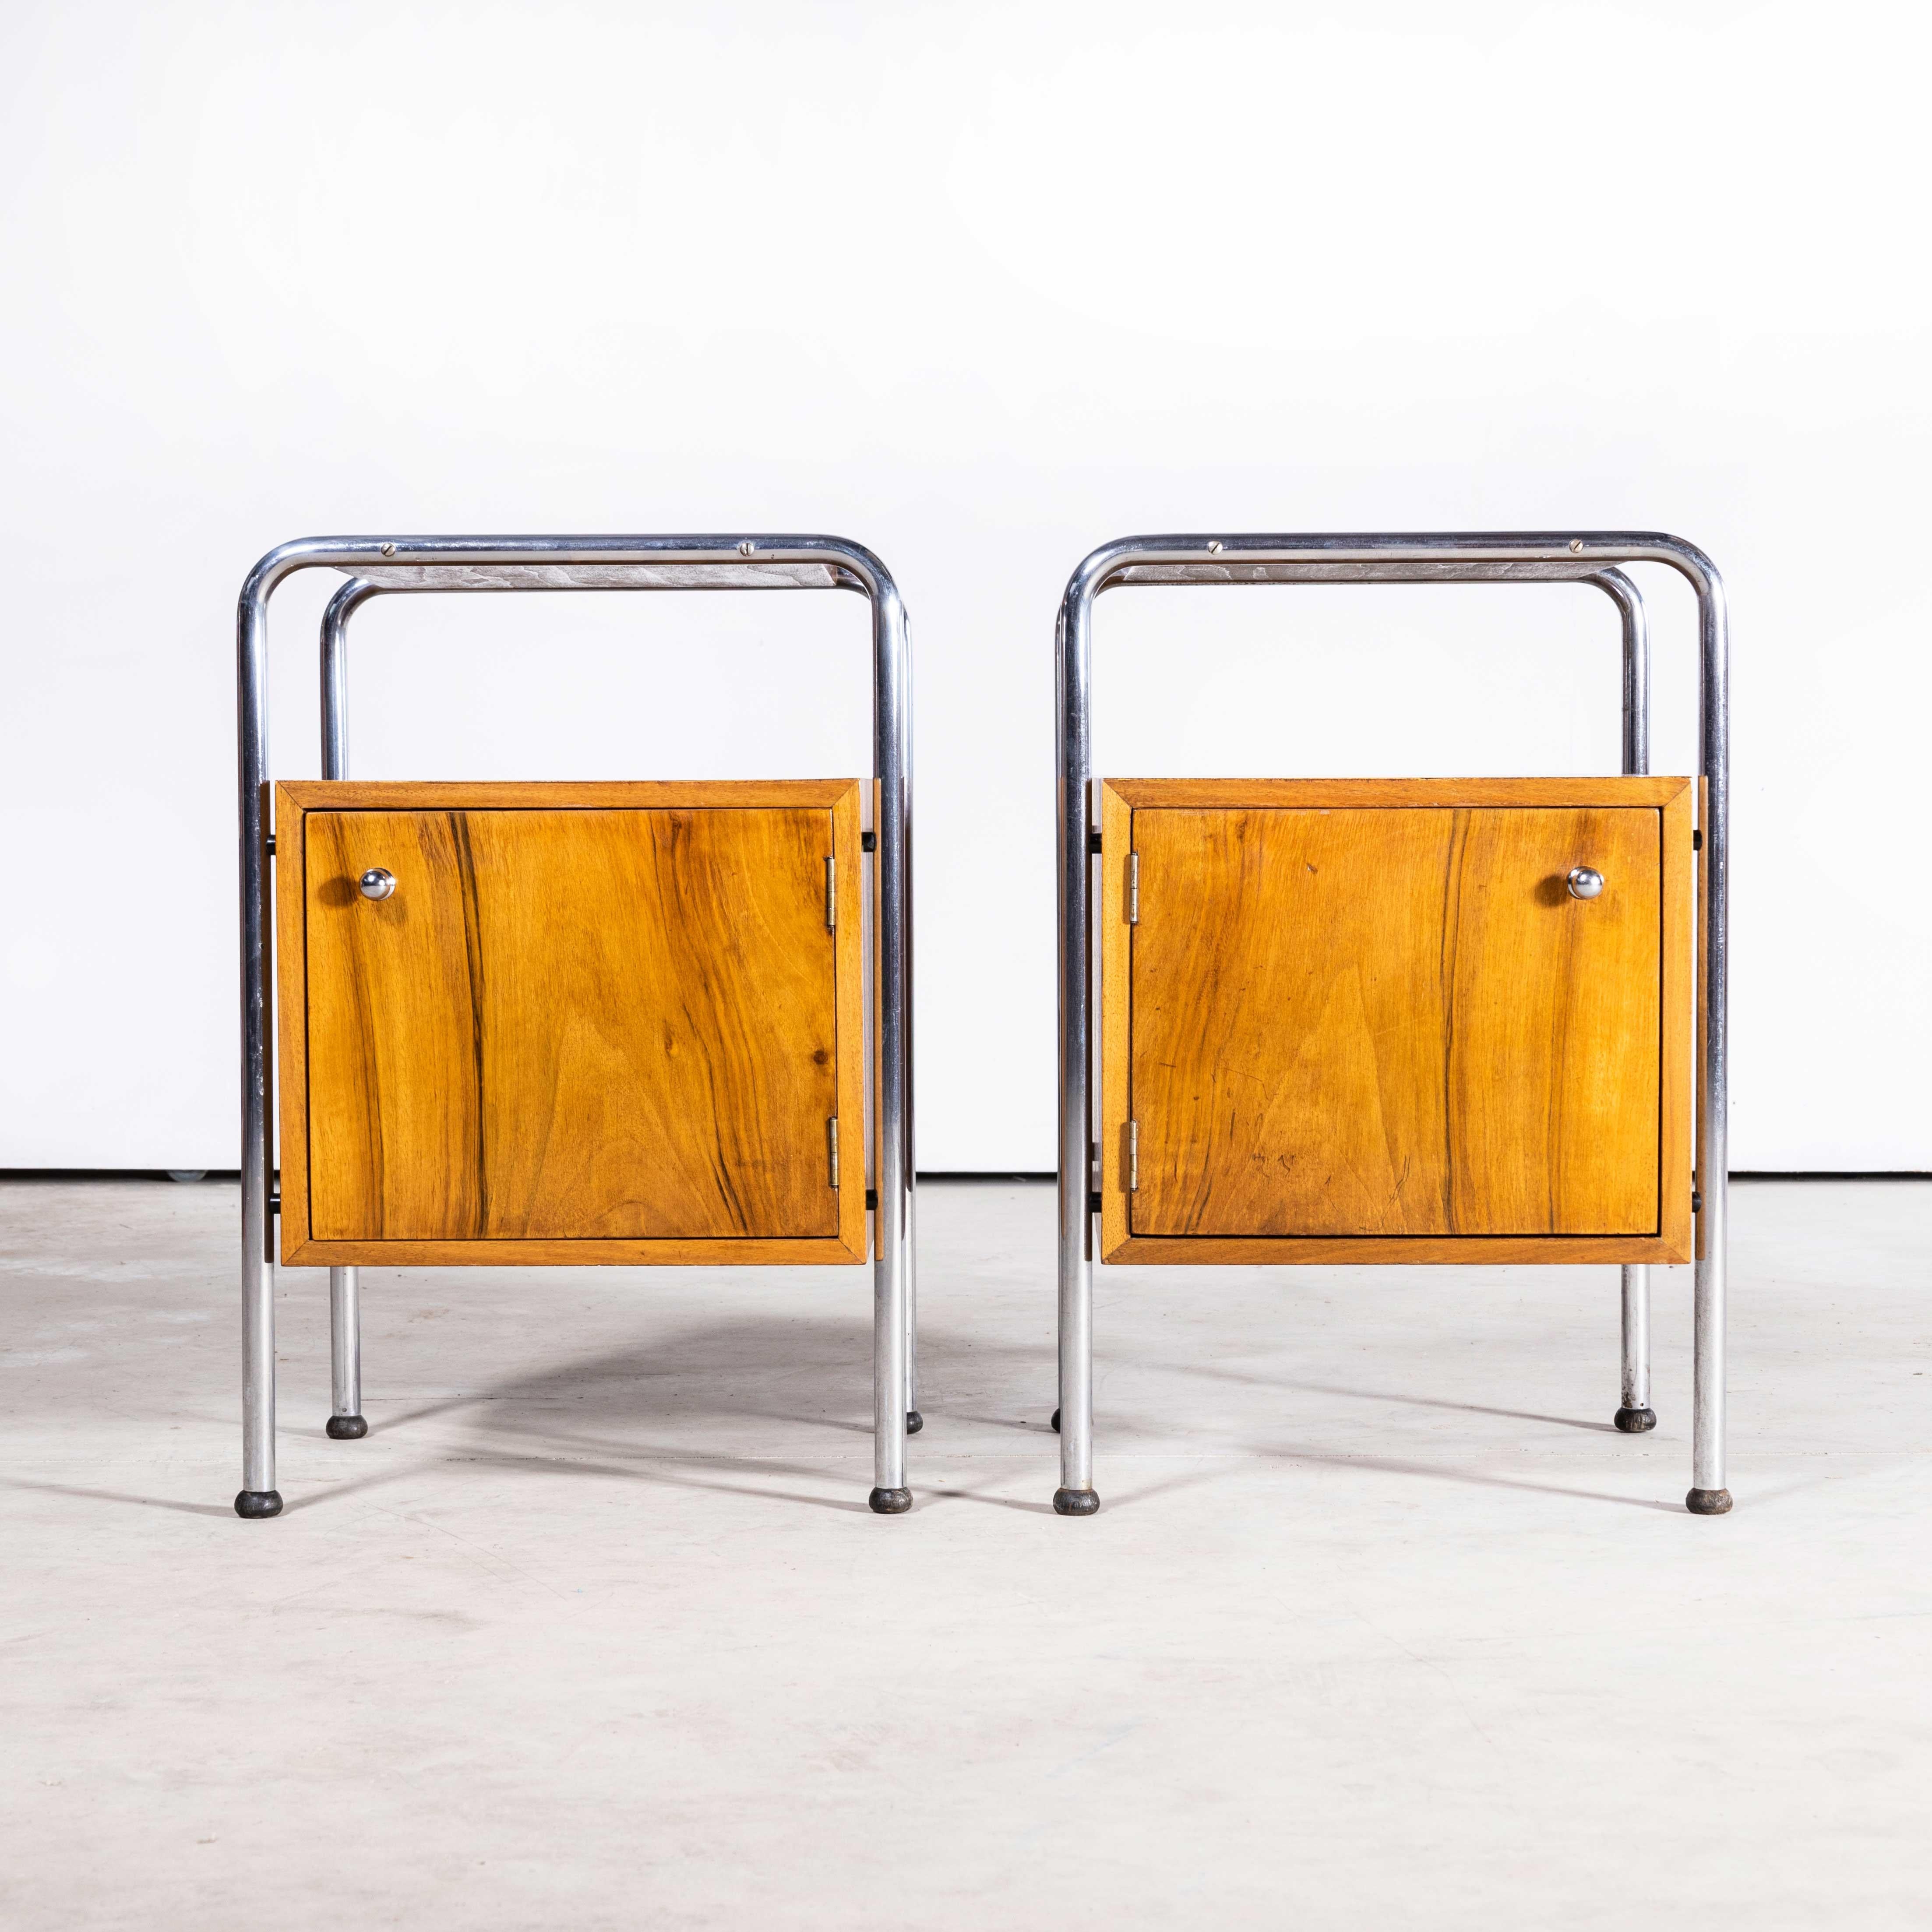 1960s Chrome and Birch Bedside Cabinets, Pair In Good Condition For Sale In Hook, Hampshire